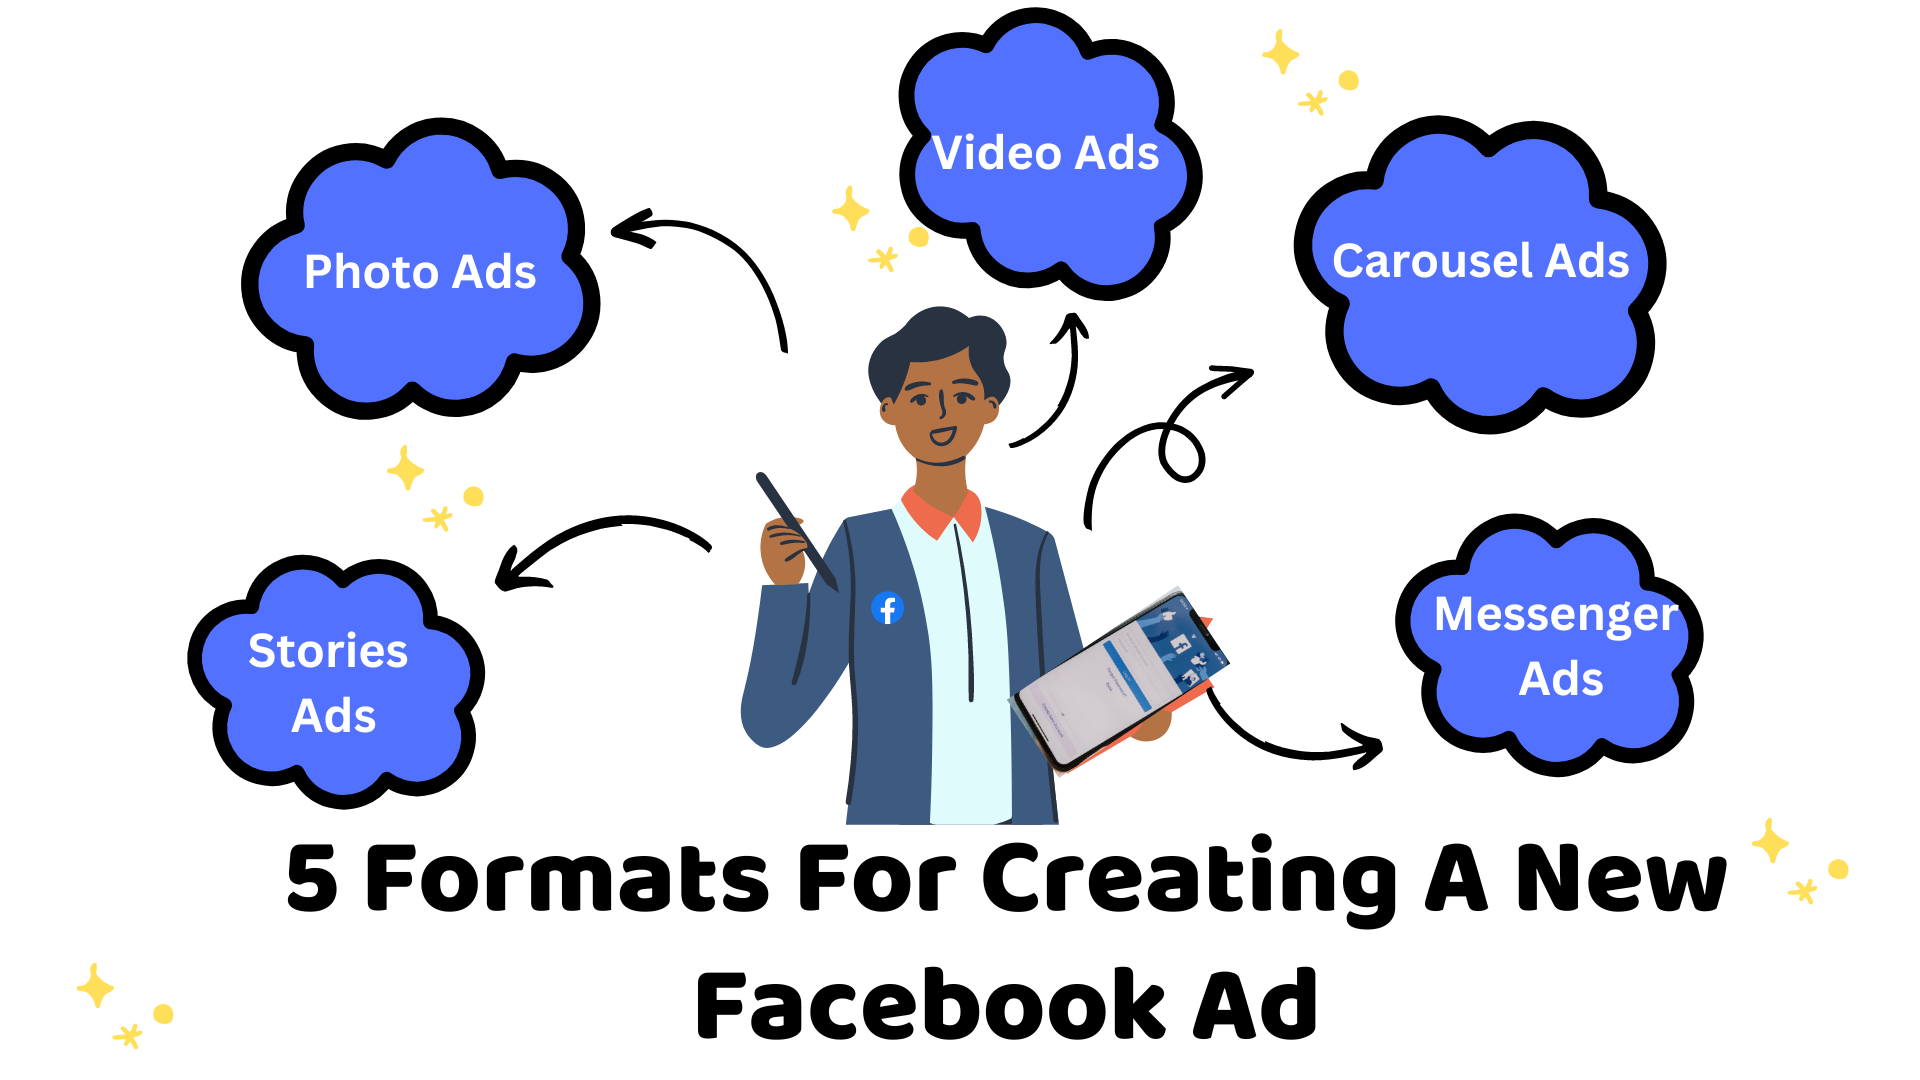 Creating a Facebook Ad Campaign